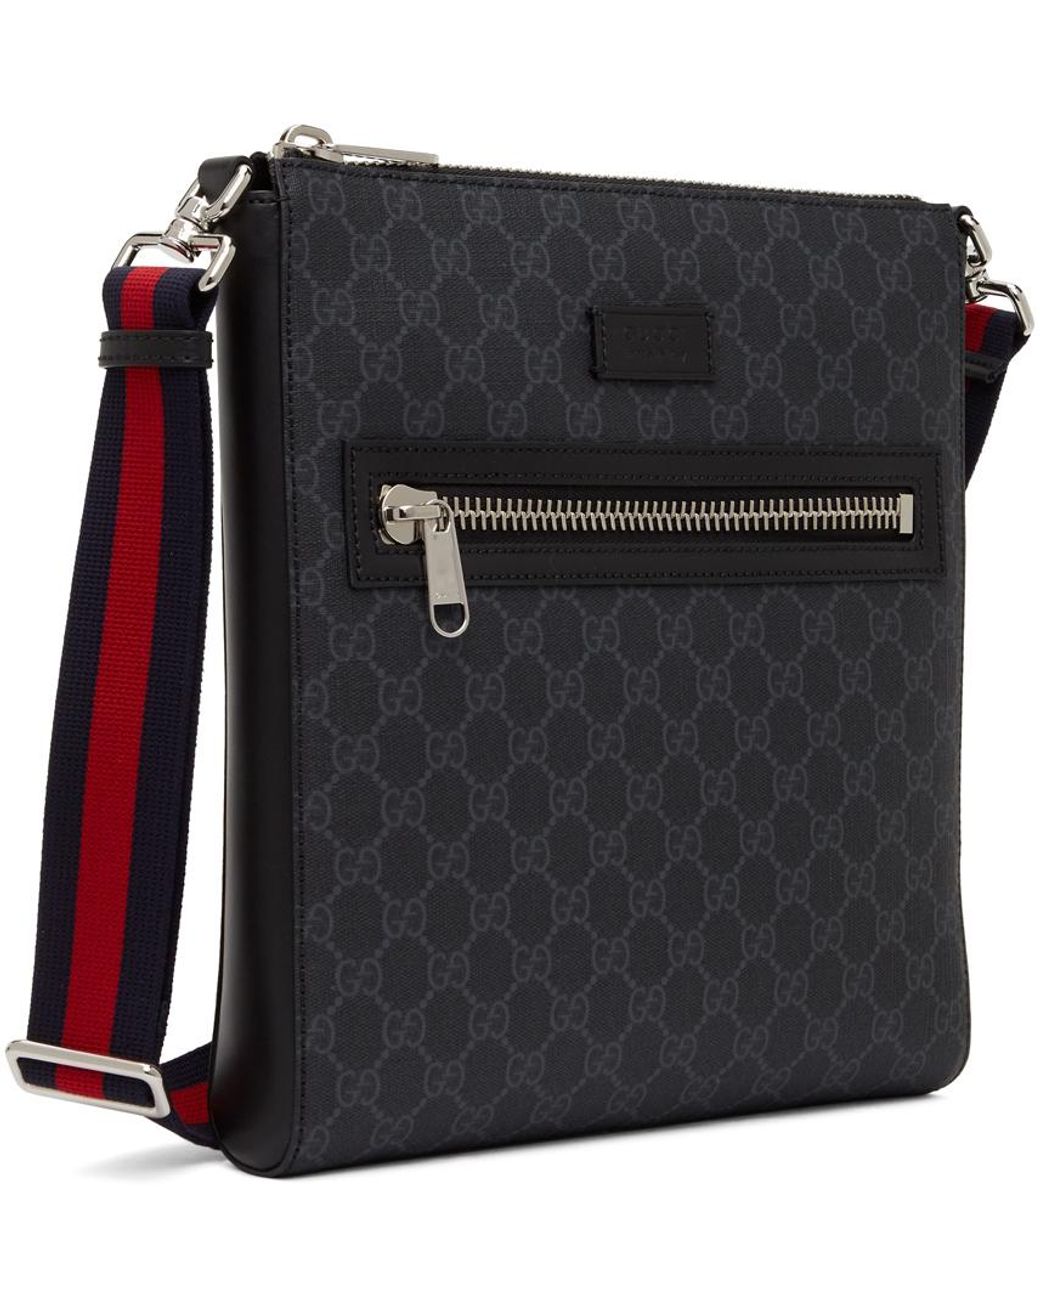 Sacs messager Gucci homme